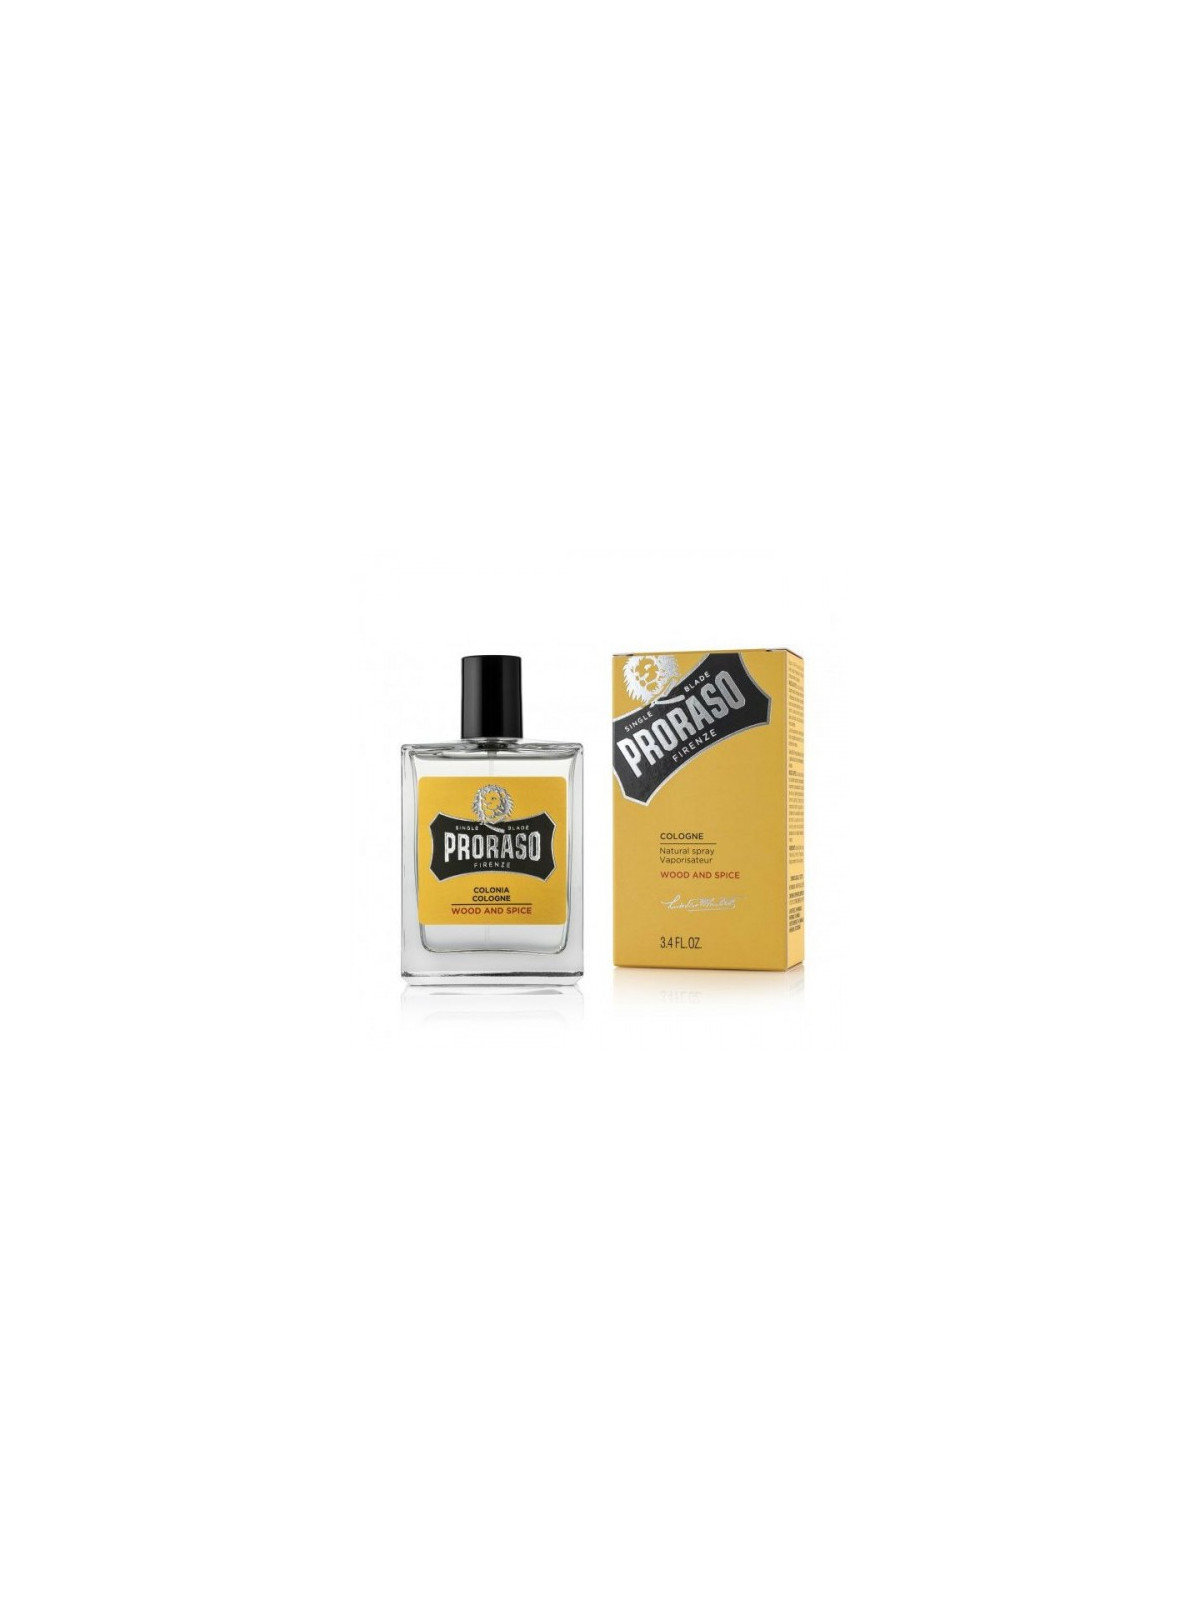 Proraso Odekolonas Cologne Wood And Spice